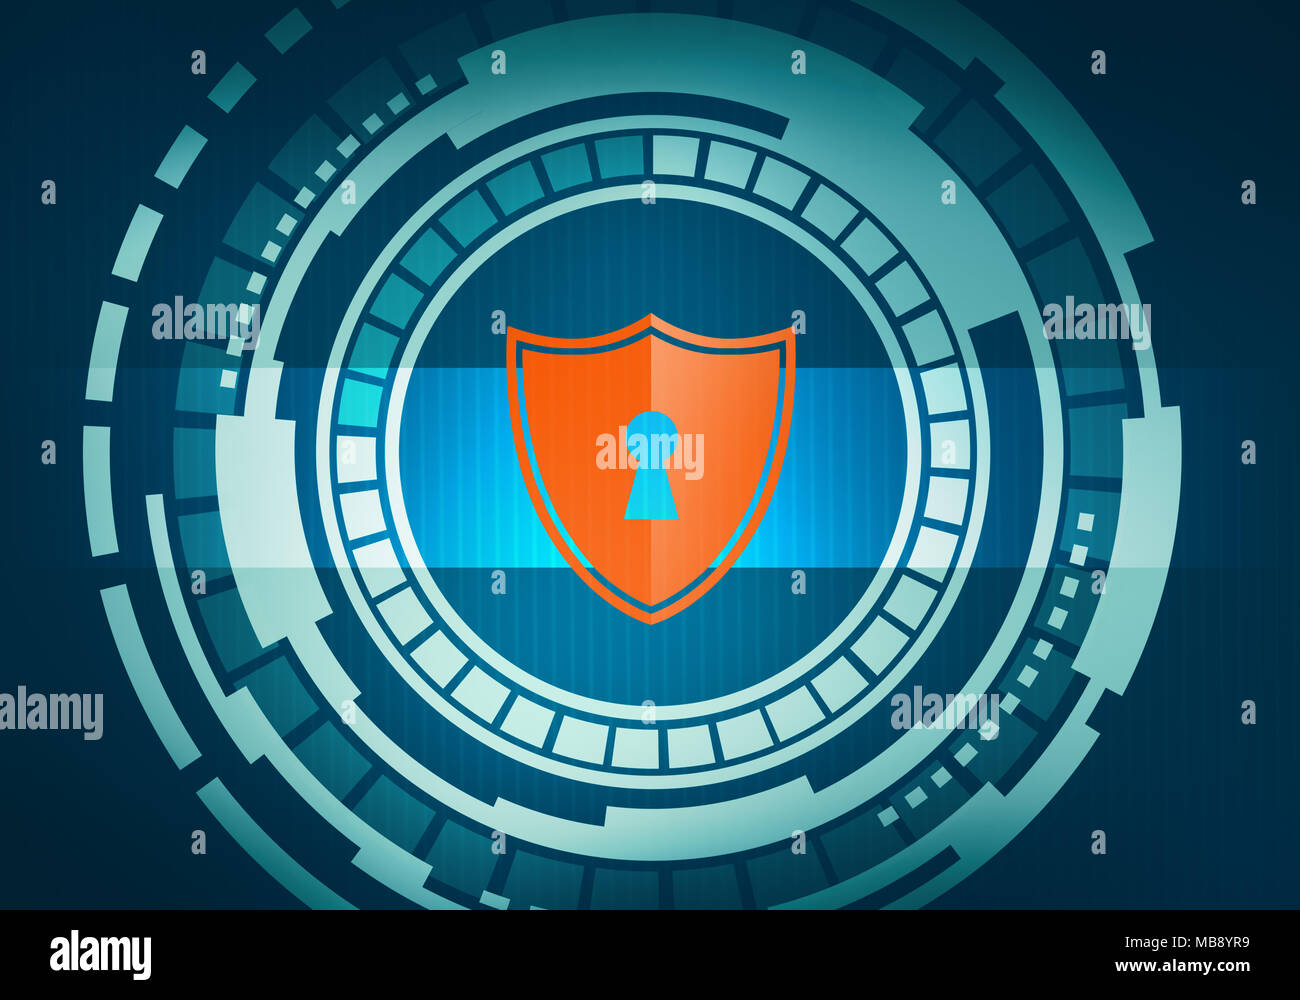 Abstract digital illustration of touch screen circle interface with security and safety shield icon on circuit microchip background. For branding, gra Stock Photo